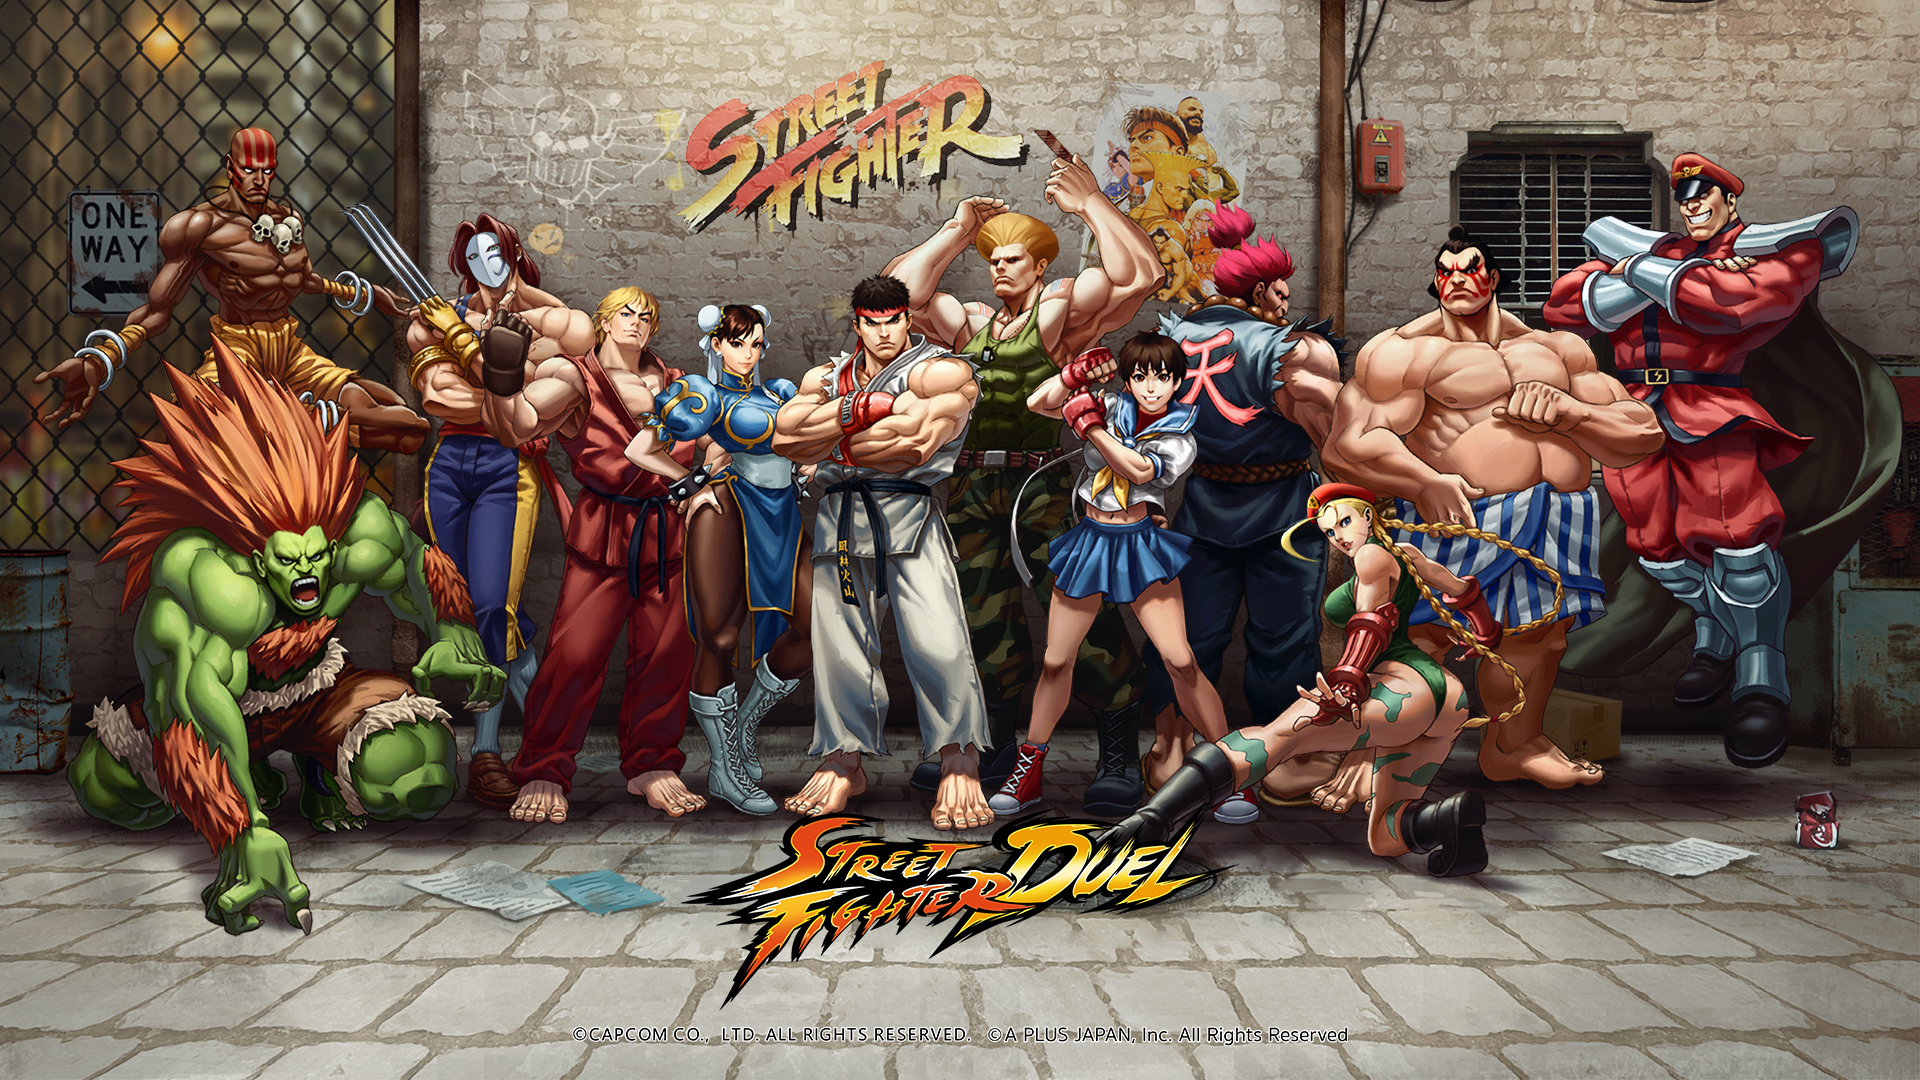 It's Your Turn to Get Into the Ring as Street Fighter: Duel Was Announced